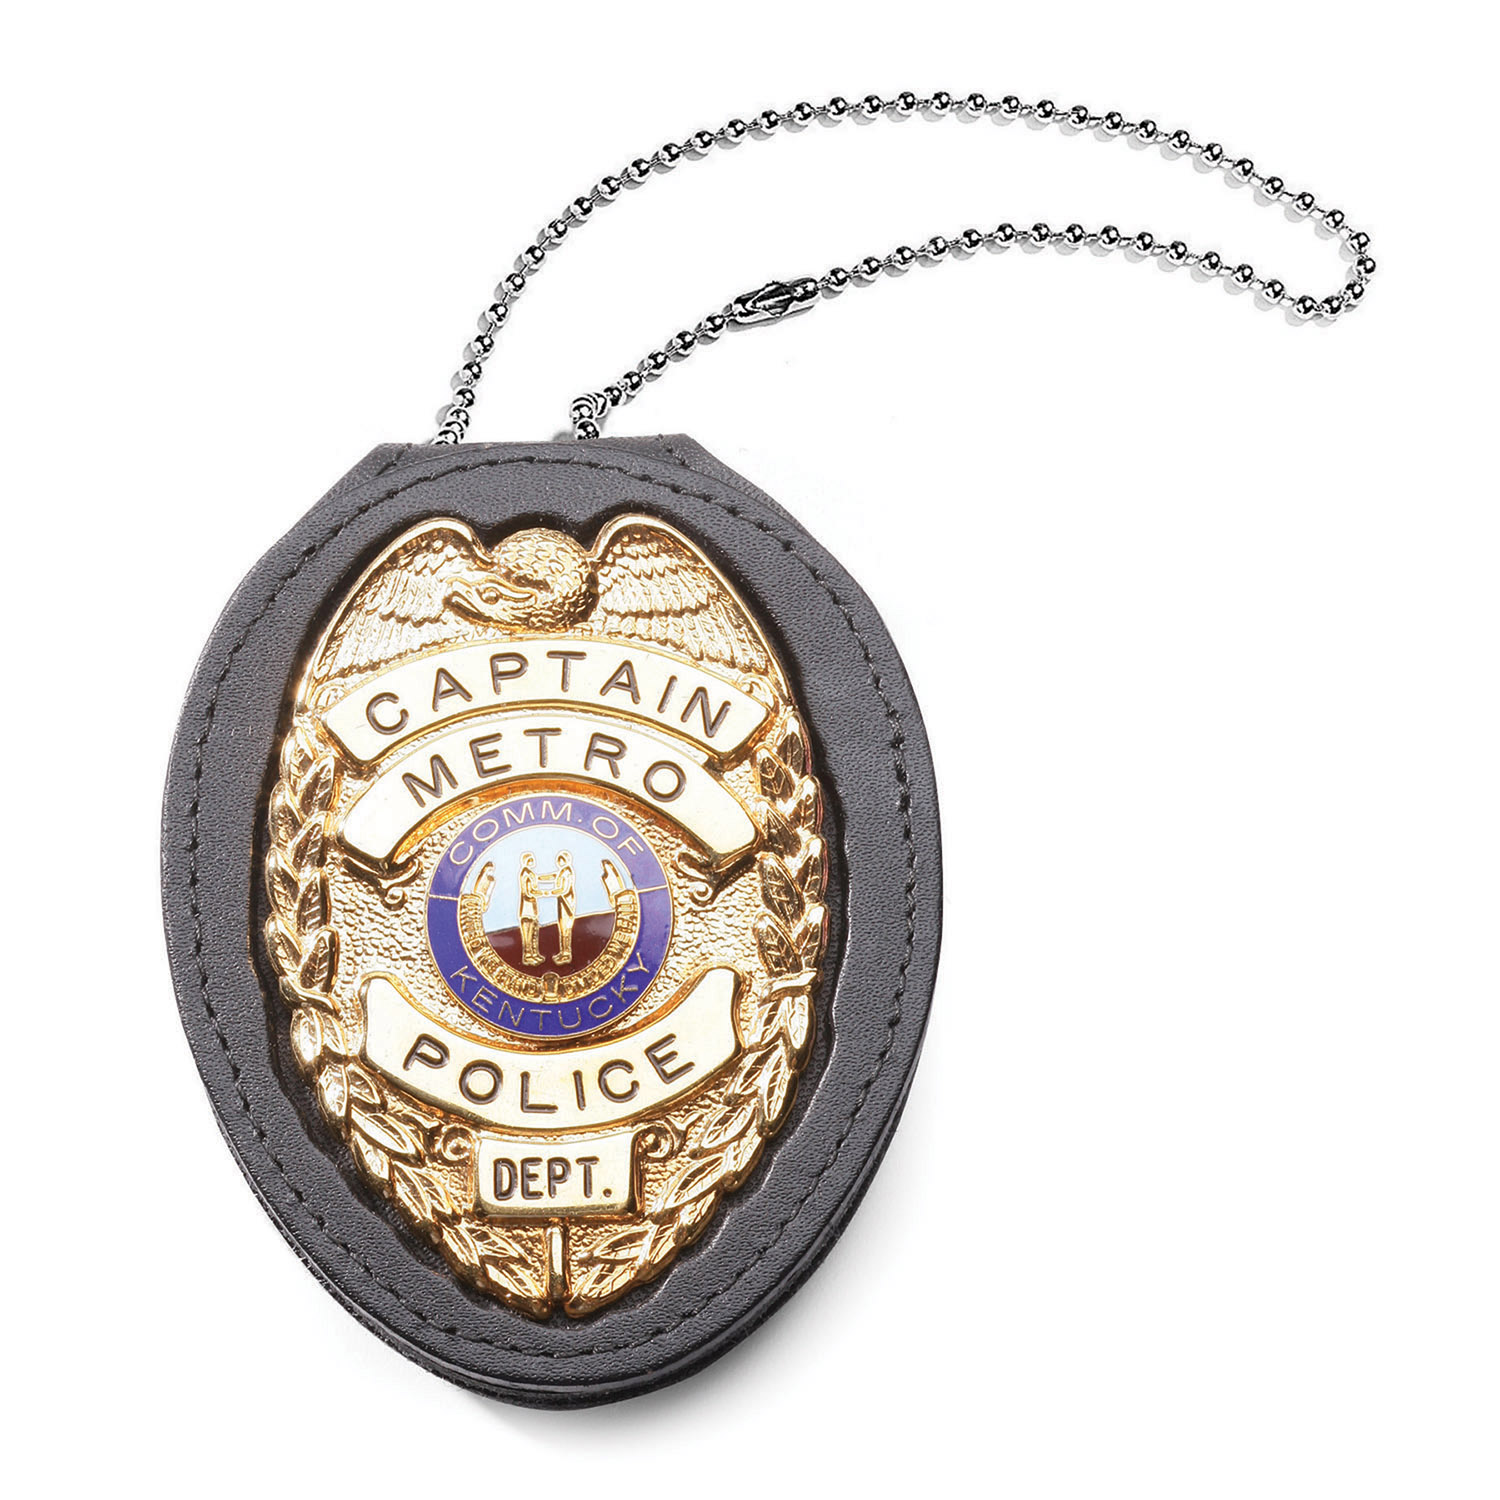 Recessed Clip-On Badge Holder With Velcro Closure